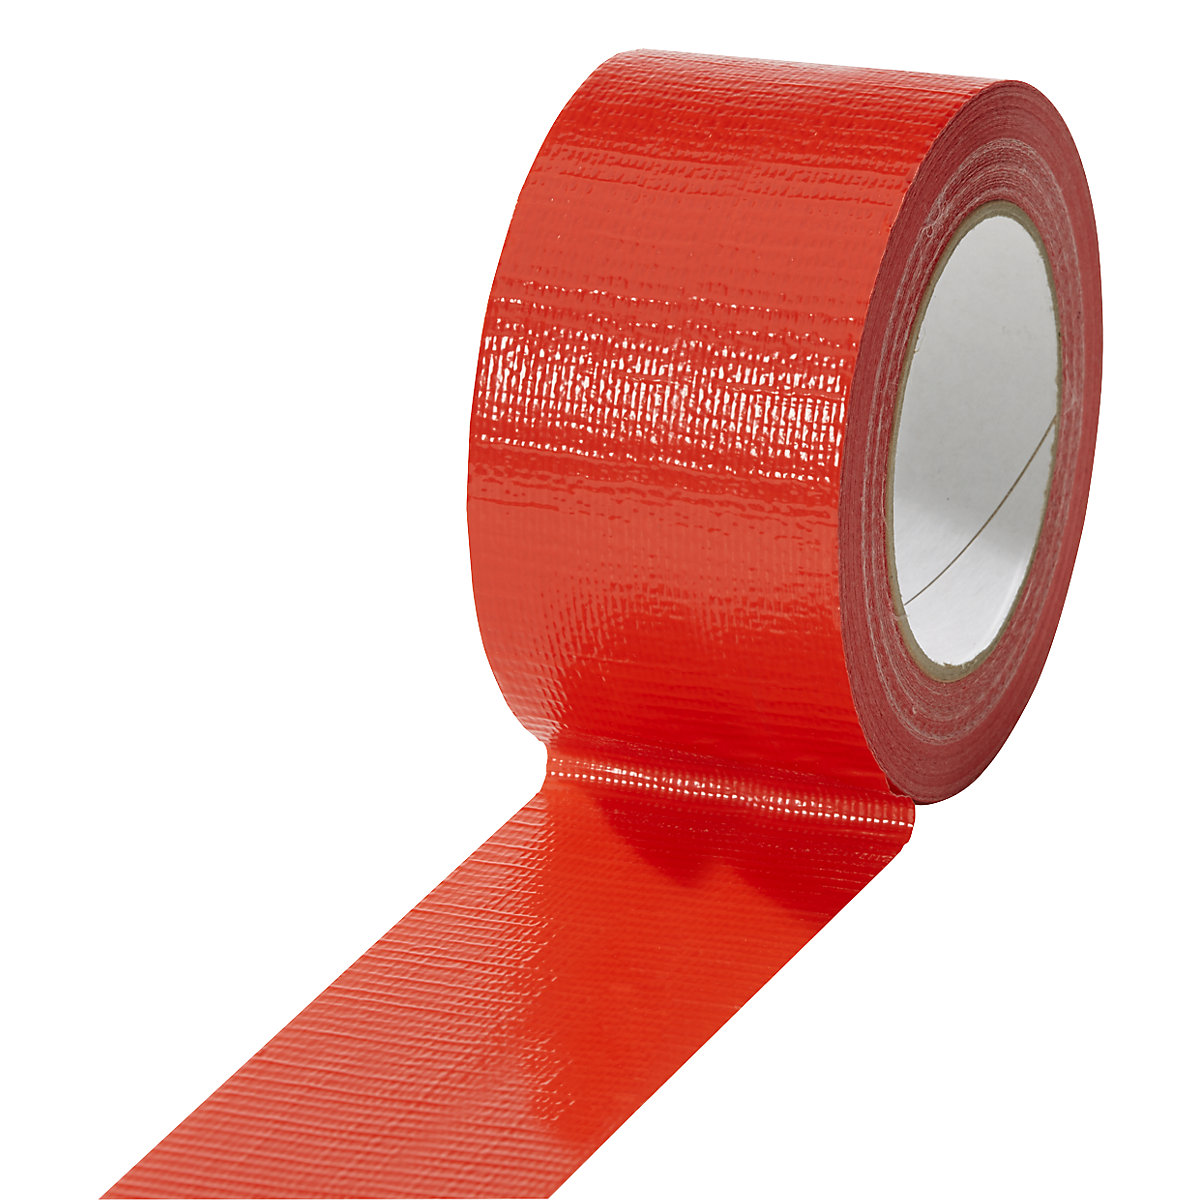 Fabric tape, in different colours, pack of 18 rolls, red, tape width 50 mm-9